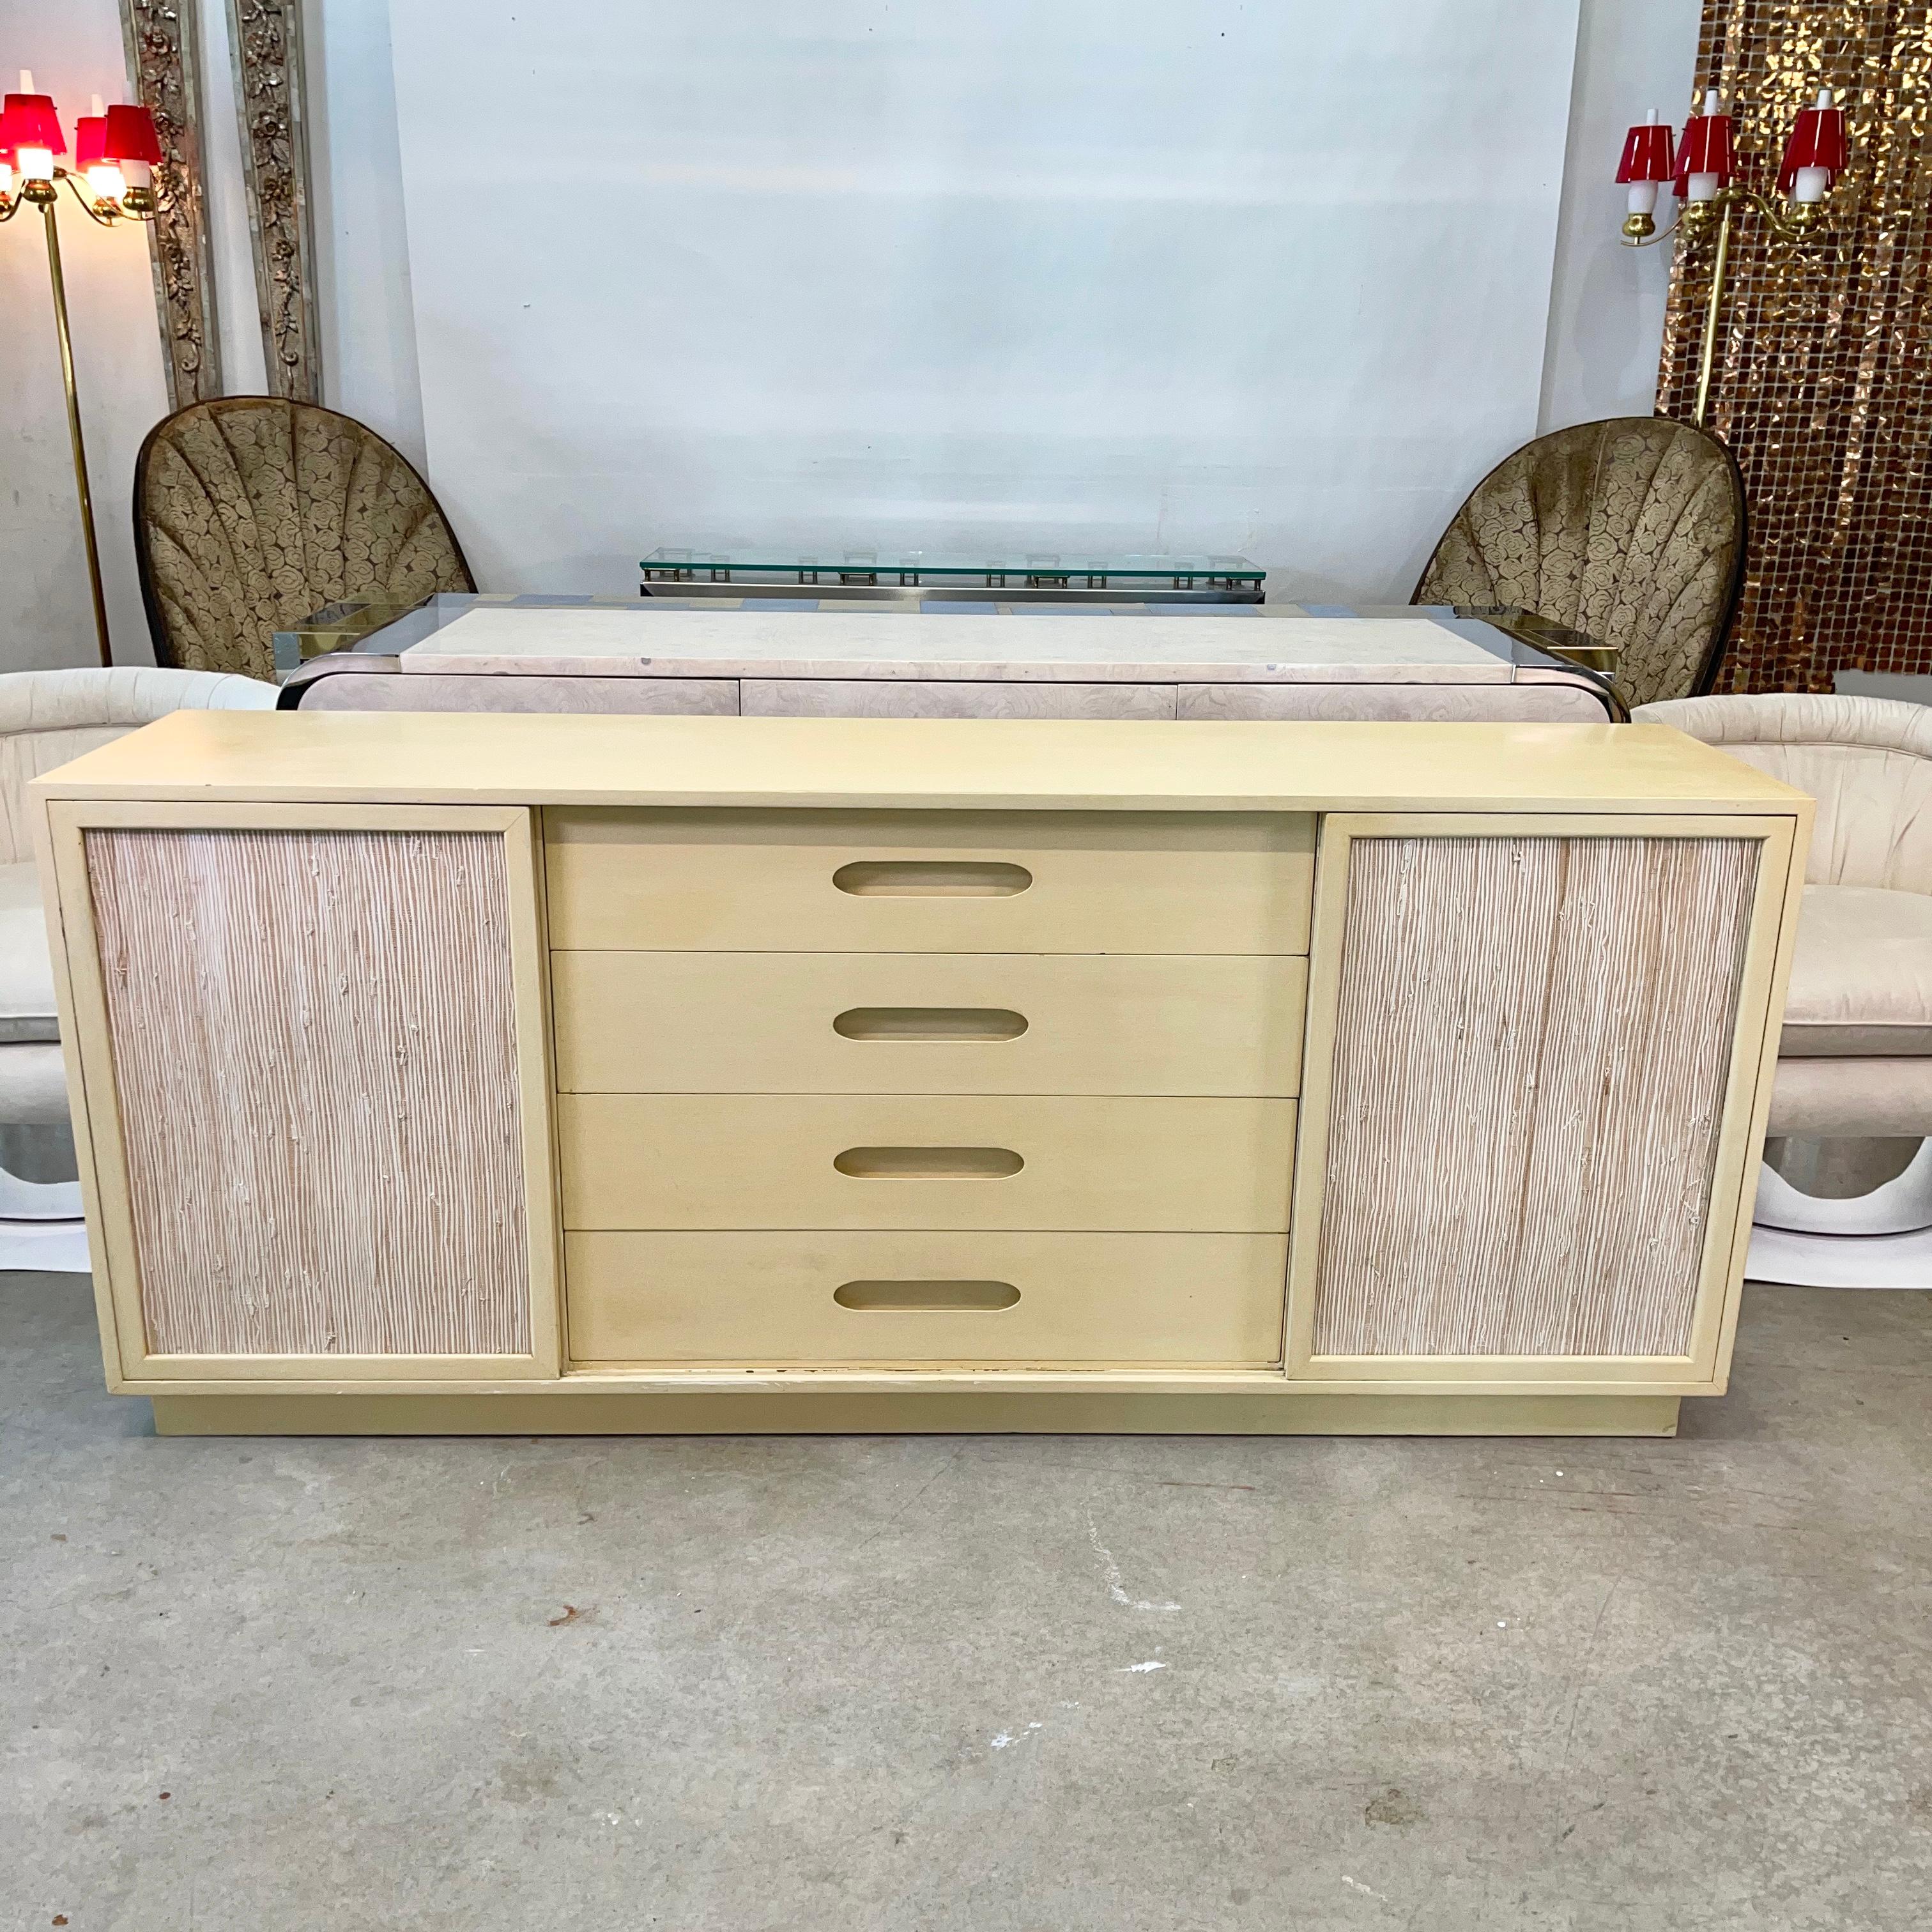 Mid-Century Modern dresser by Harvey Probber in grain painted blonde mahogany with four matching large center drawers having distinctive Probber recessed pulls and two sliding doors paneled in rough textured grasscloth, concealing four white